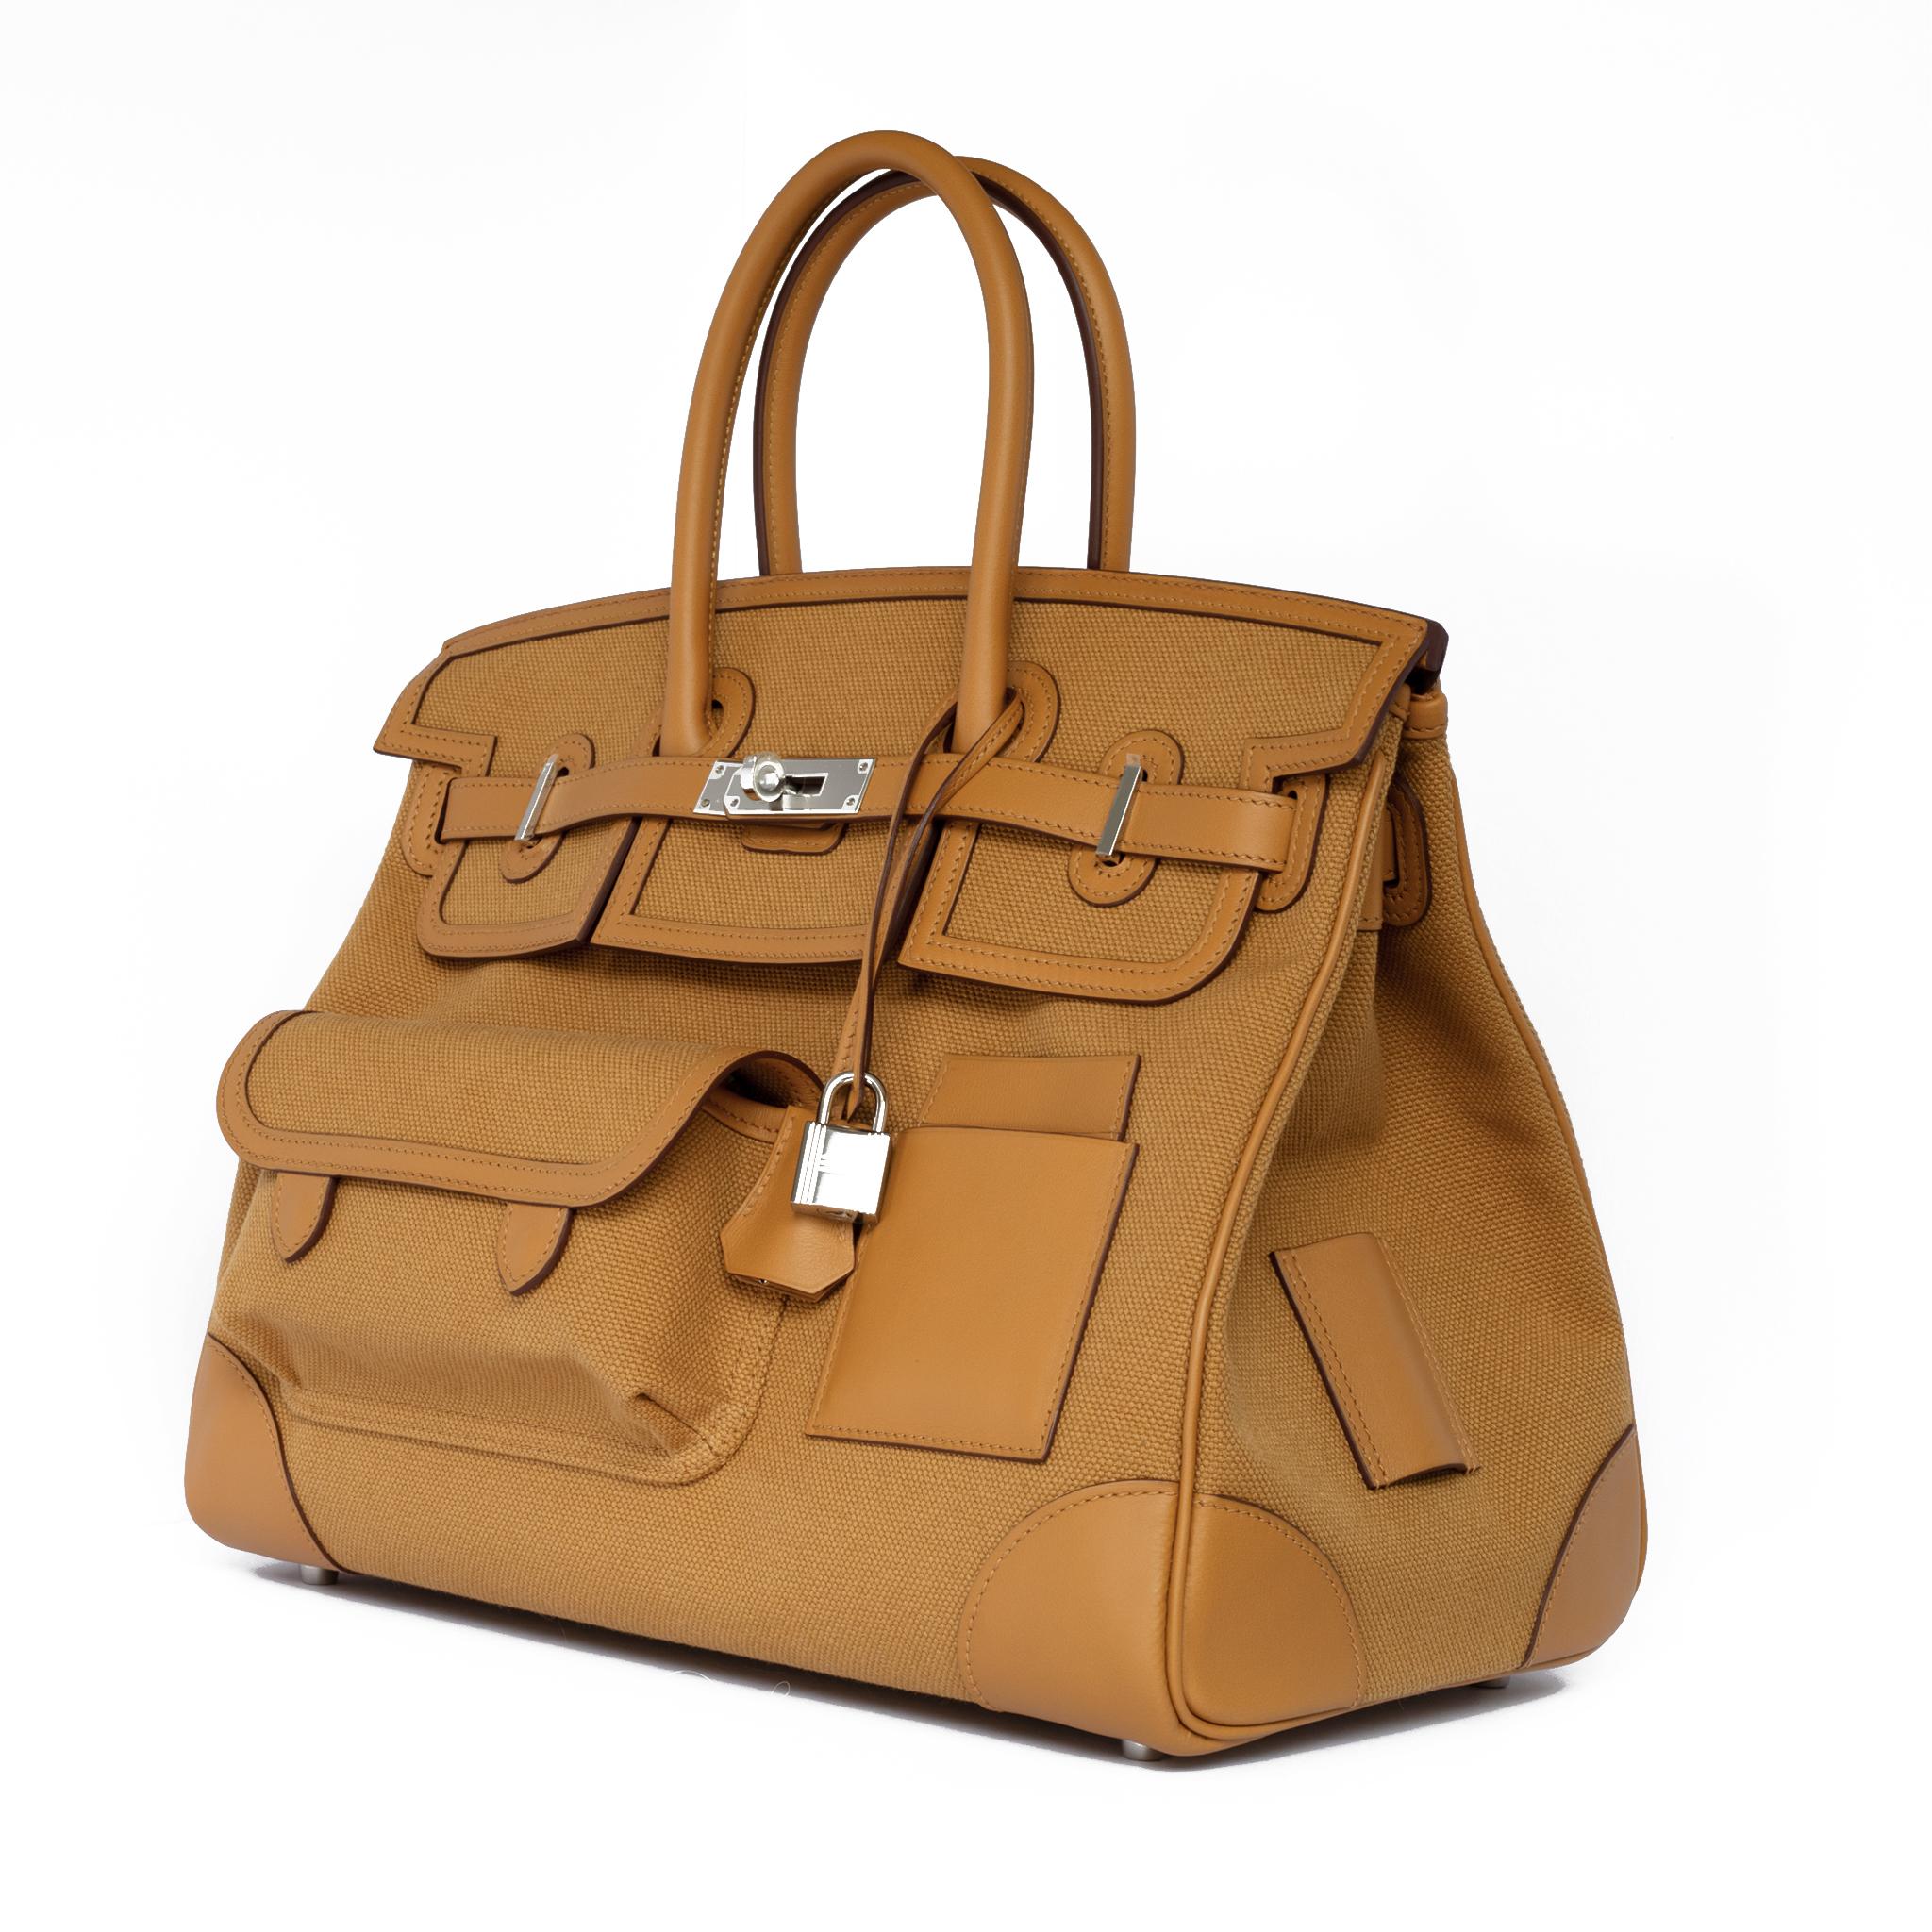 1stdibs Exclusives From Three Over Six

Brand: Hermès 
Style: Birkin 